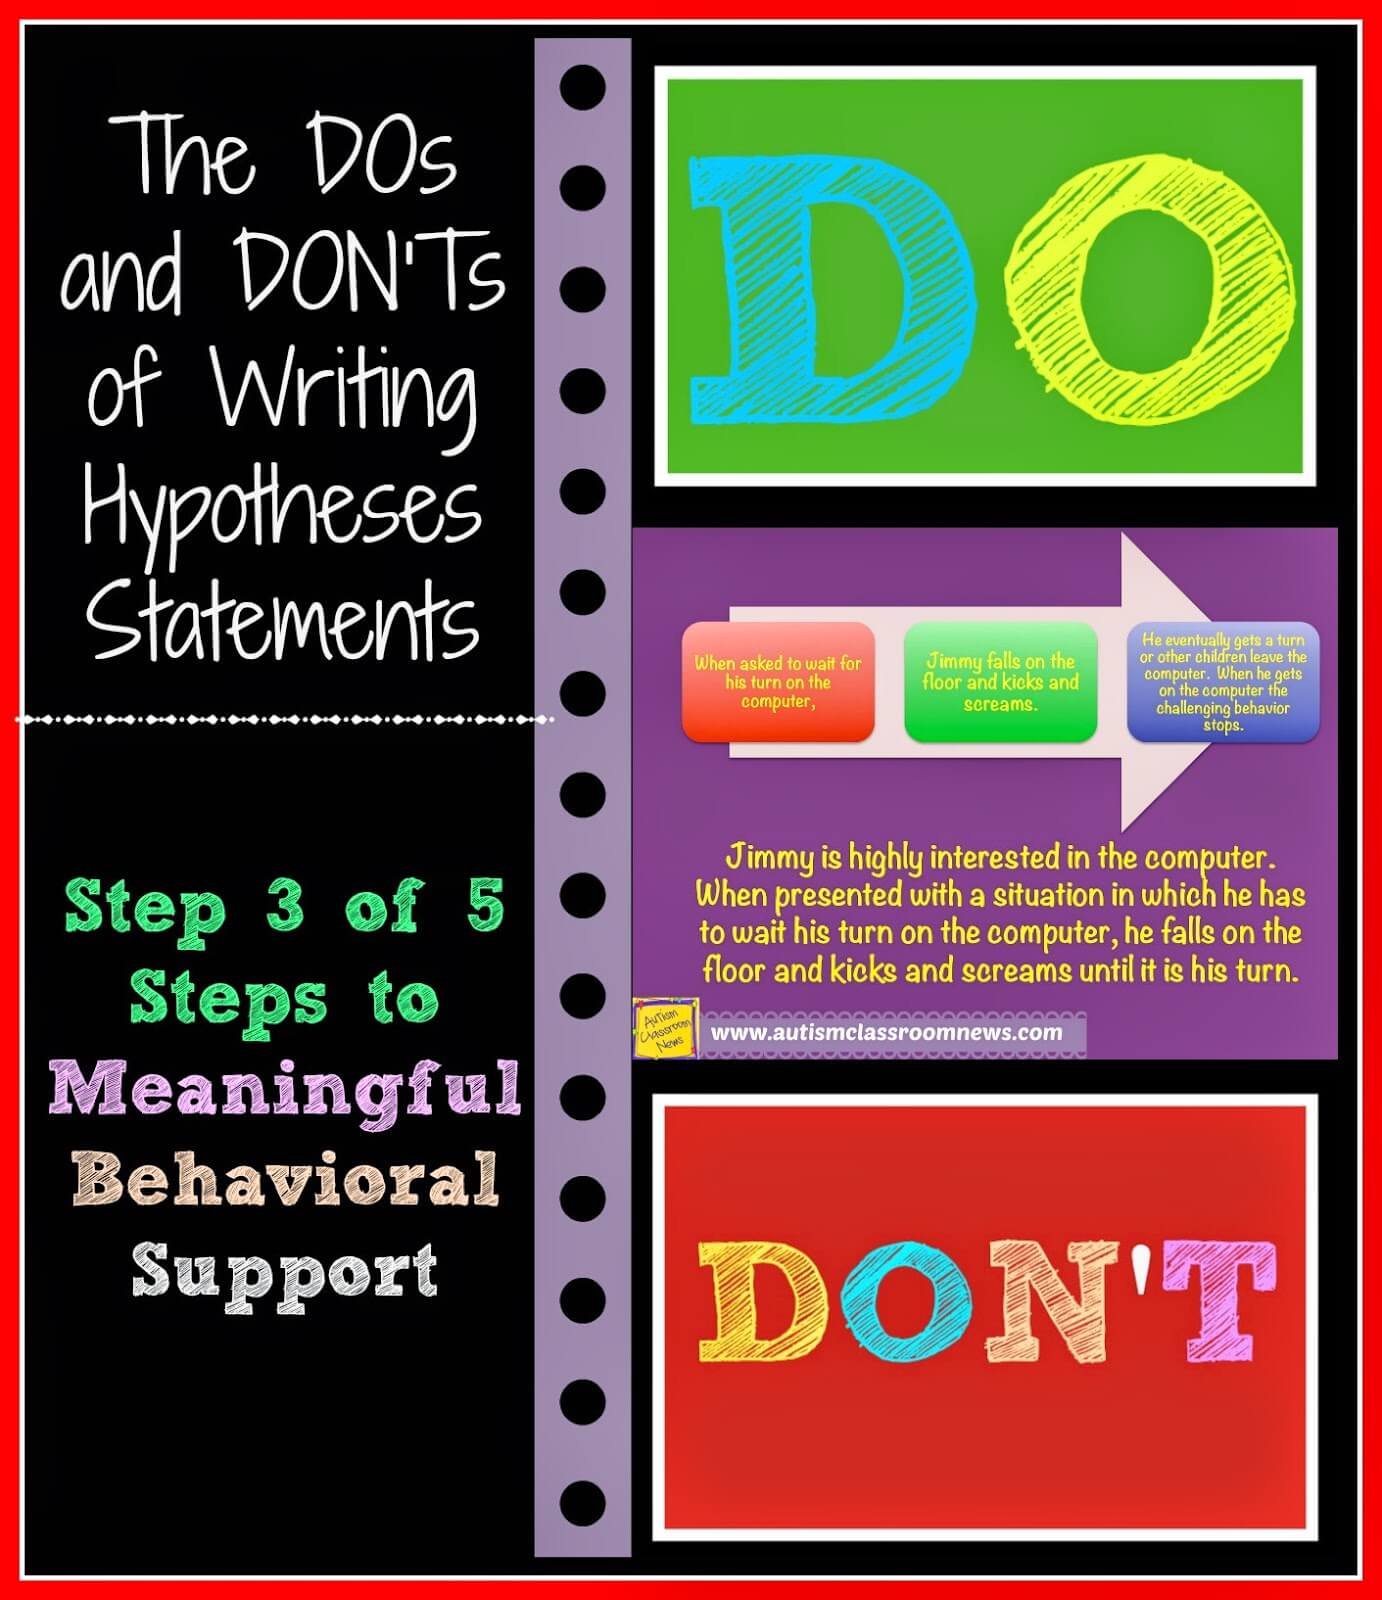 The Dos And Donts Of Hypothesis Statements Step 3 Of 5 To Meaningful